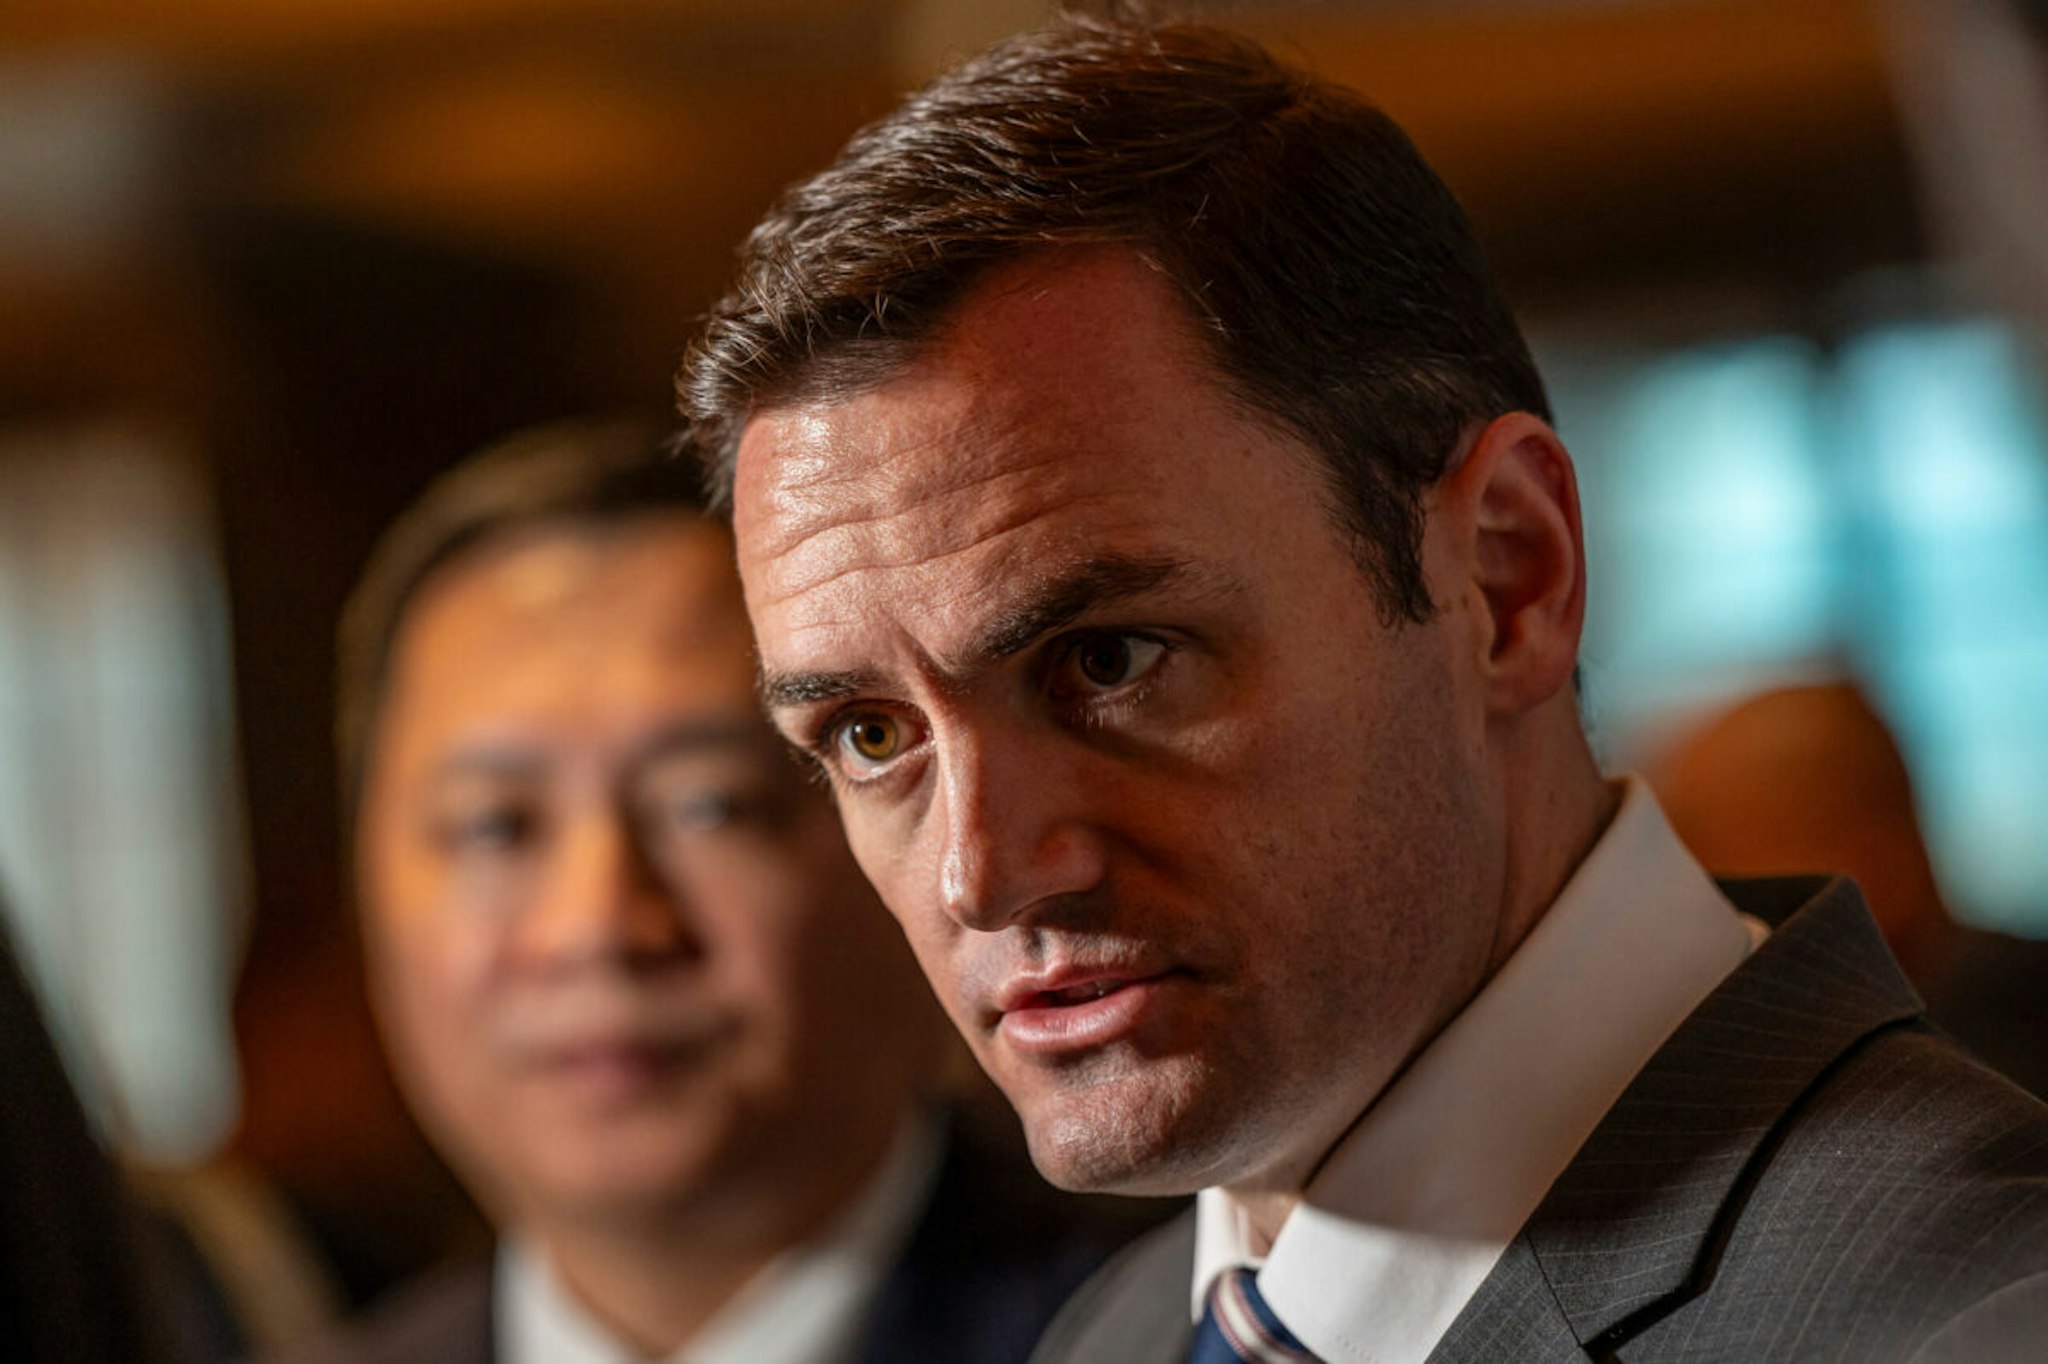 Representative Mike Gallagher, a Republican from Wisconsin and chairman of the House Select Committee on the Chinese Communist Party, speaks to members of the media following a news conference with Chinese dissidents in San Francisco, California, US, on Saturday, Nov. 11, 2023. Next week's long-awaited gathering in San Francisco of leaders from the 21-member forum marks the first time the US has hosted the event in 12 years and will see the first conversation in a year between Biden and his Chinese counterpart Xi Jinping on the sidelines of the summit.